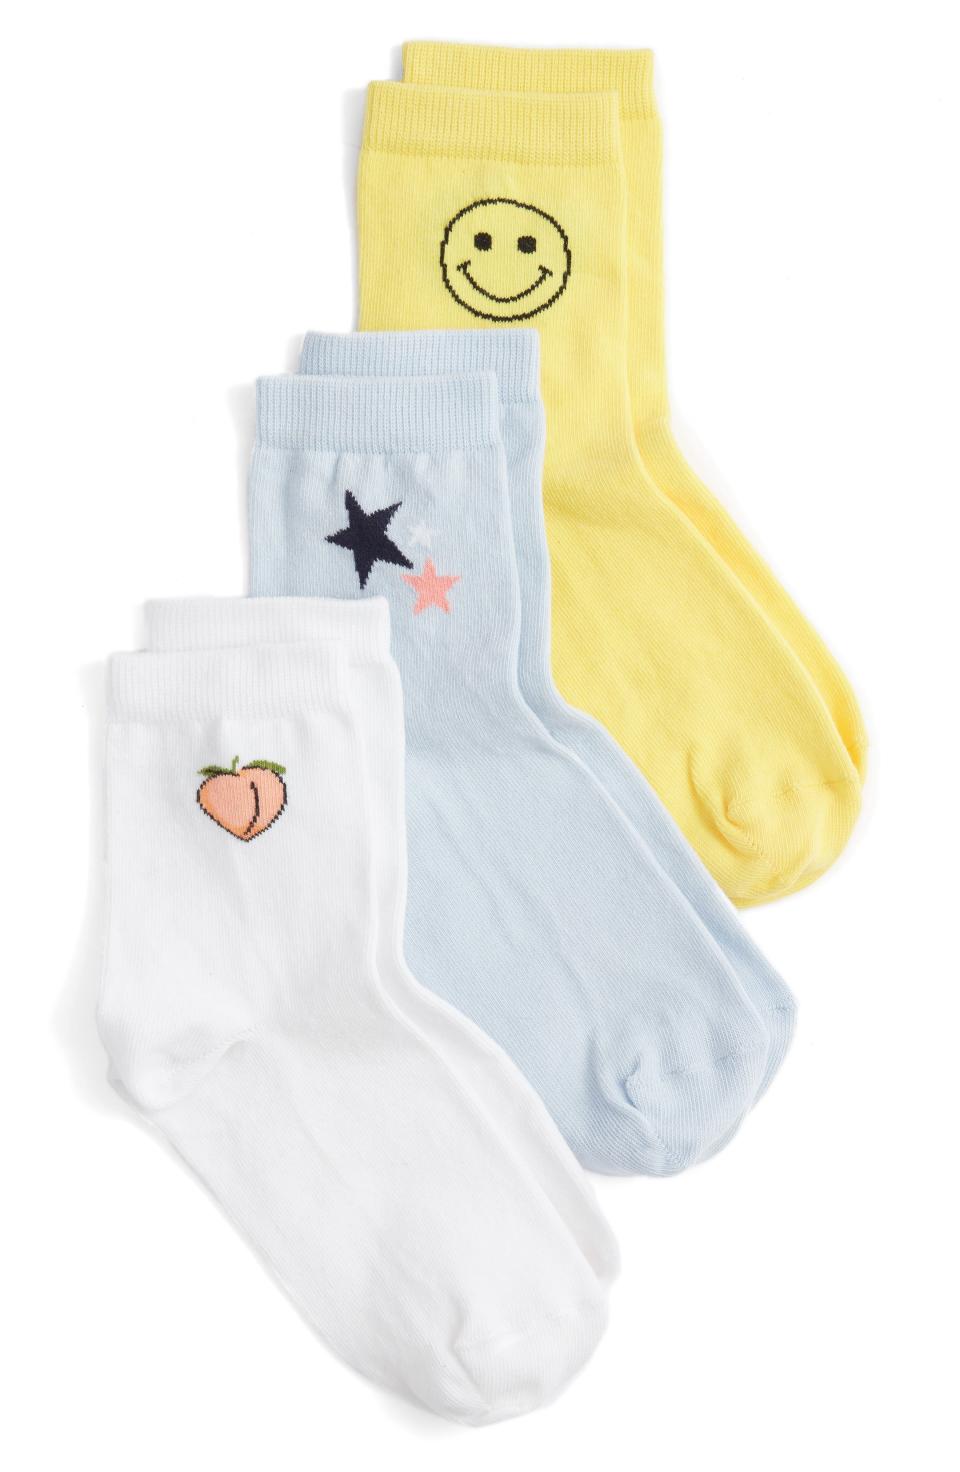 3) Summer Vibes Assorted 3-Pack Ankle Socks